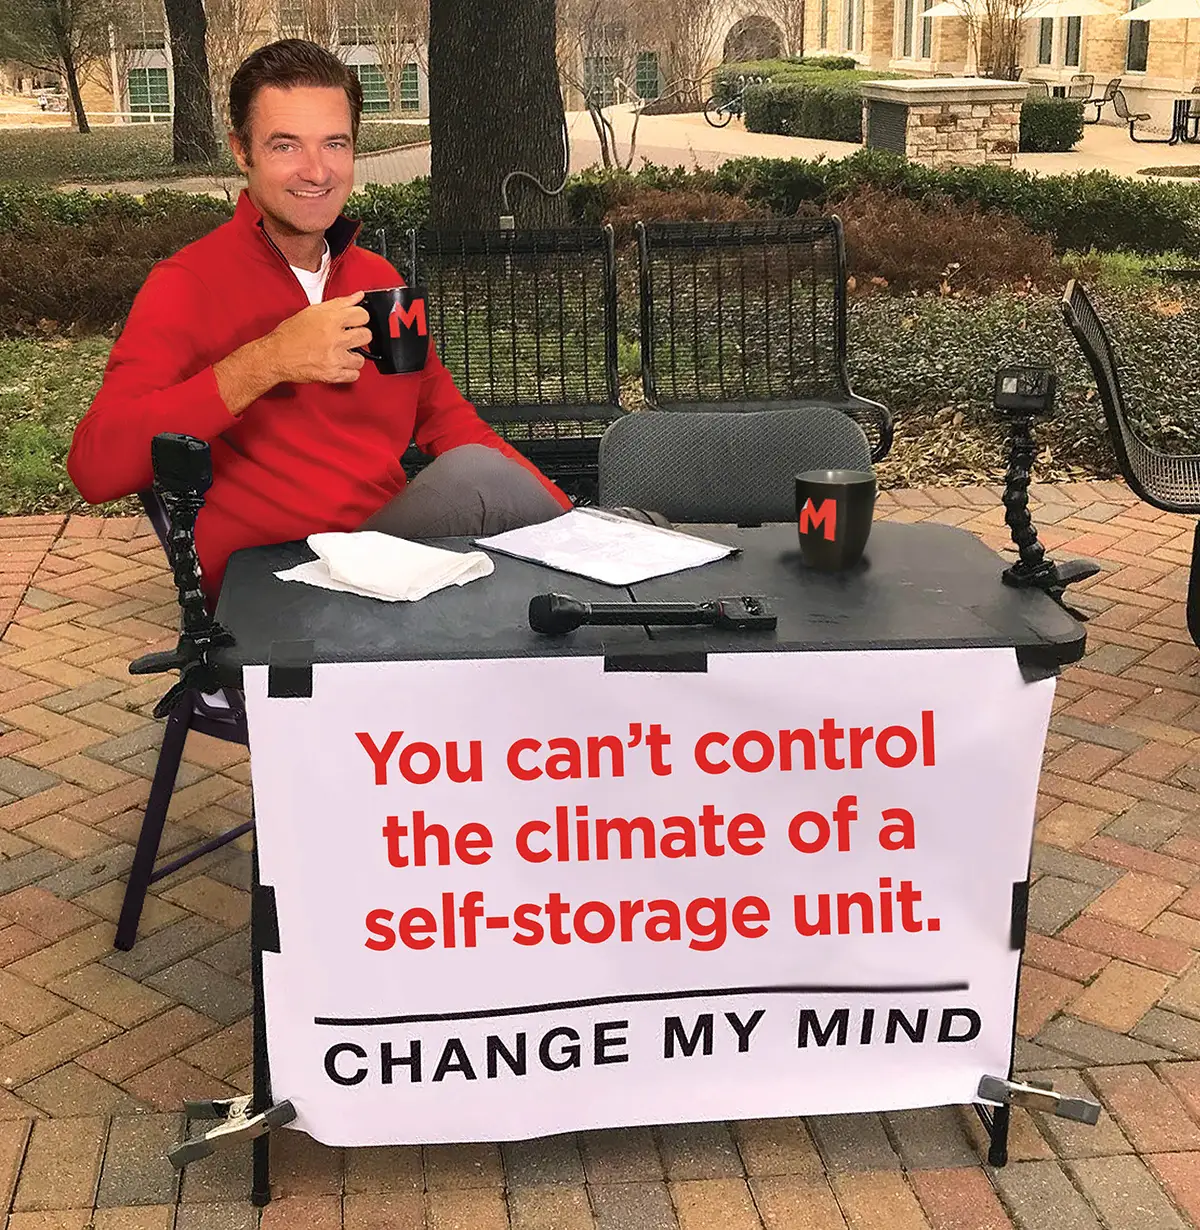 Travis Morrow as popular internet meme with the sign You can't control the climate of a self-storage unit